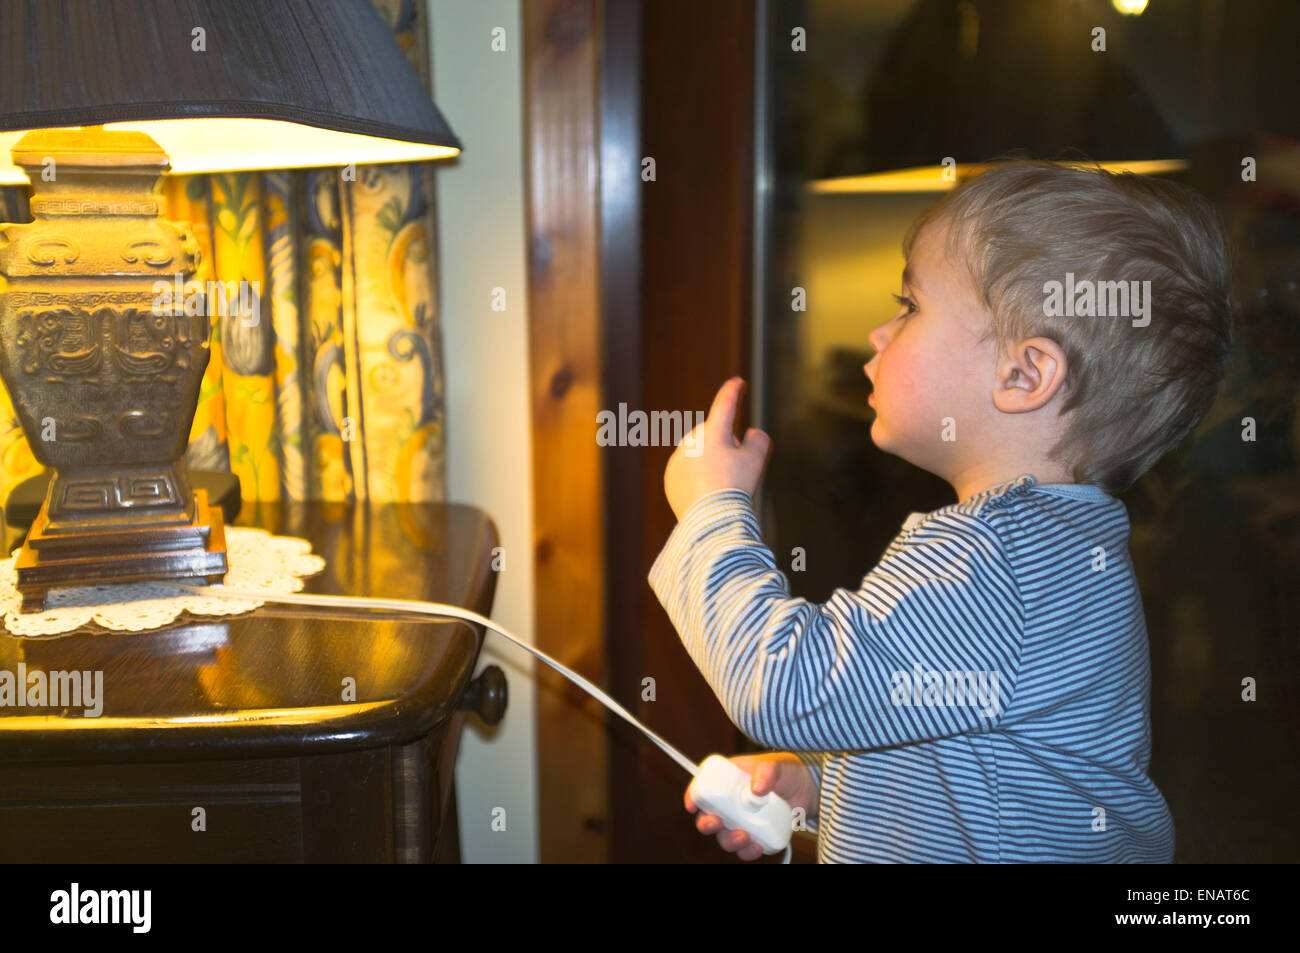 dh child electricity CHILDERN UK Two year old boy baby child switch lamp experiment light at home children experimenting with electricity Stock Photo